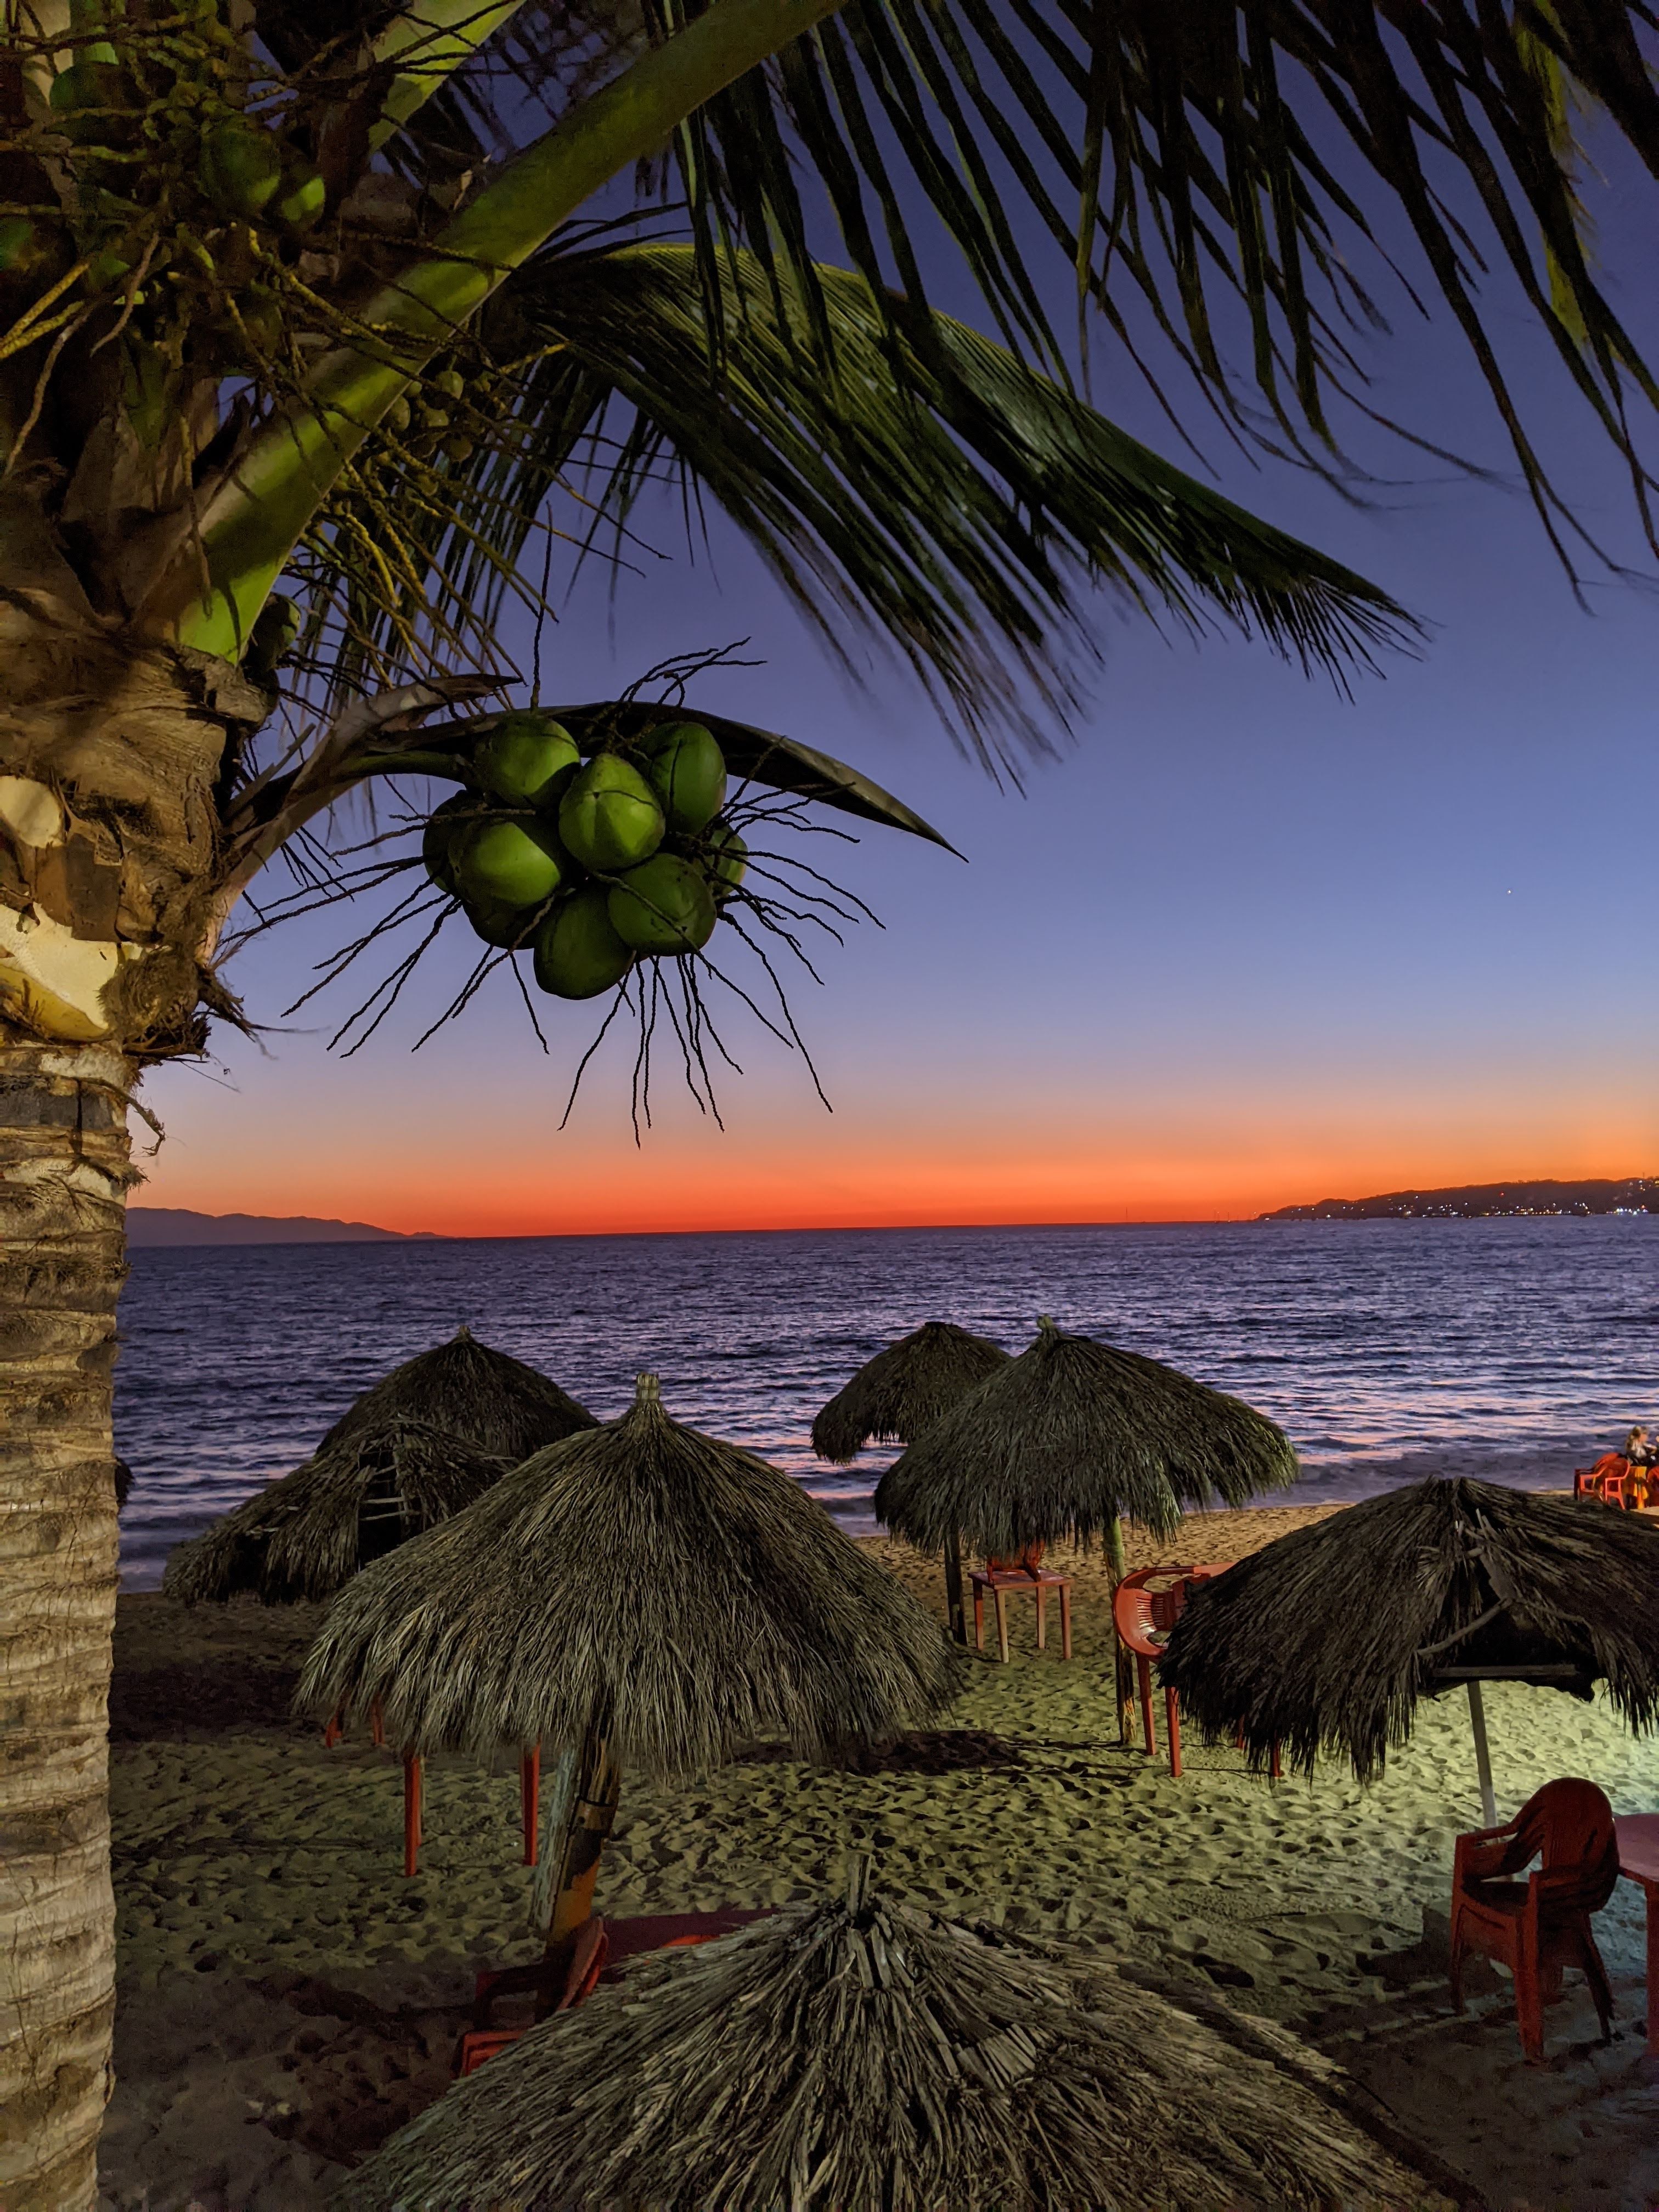 sunset over the water with coconuts in the foregound